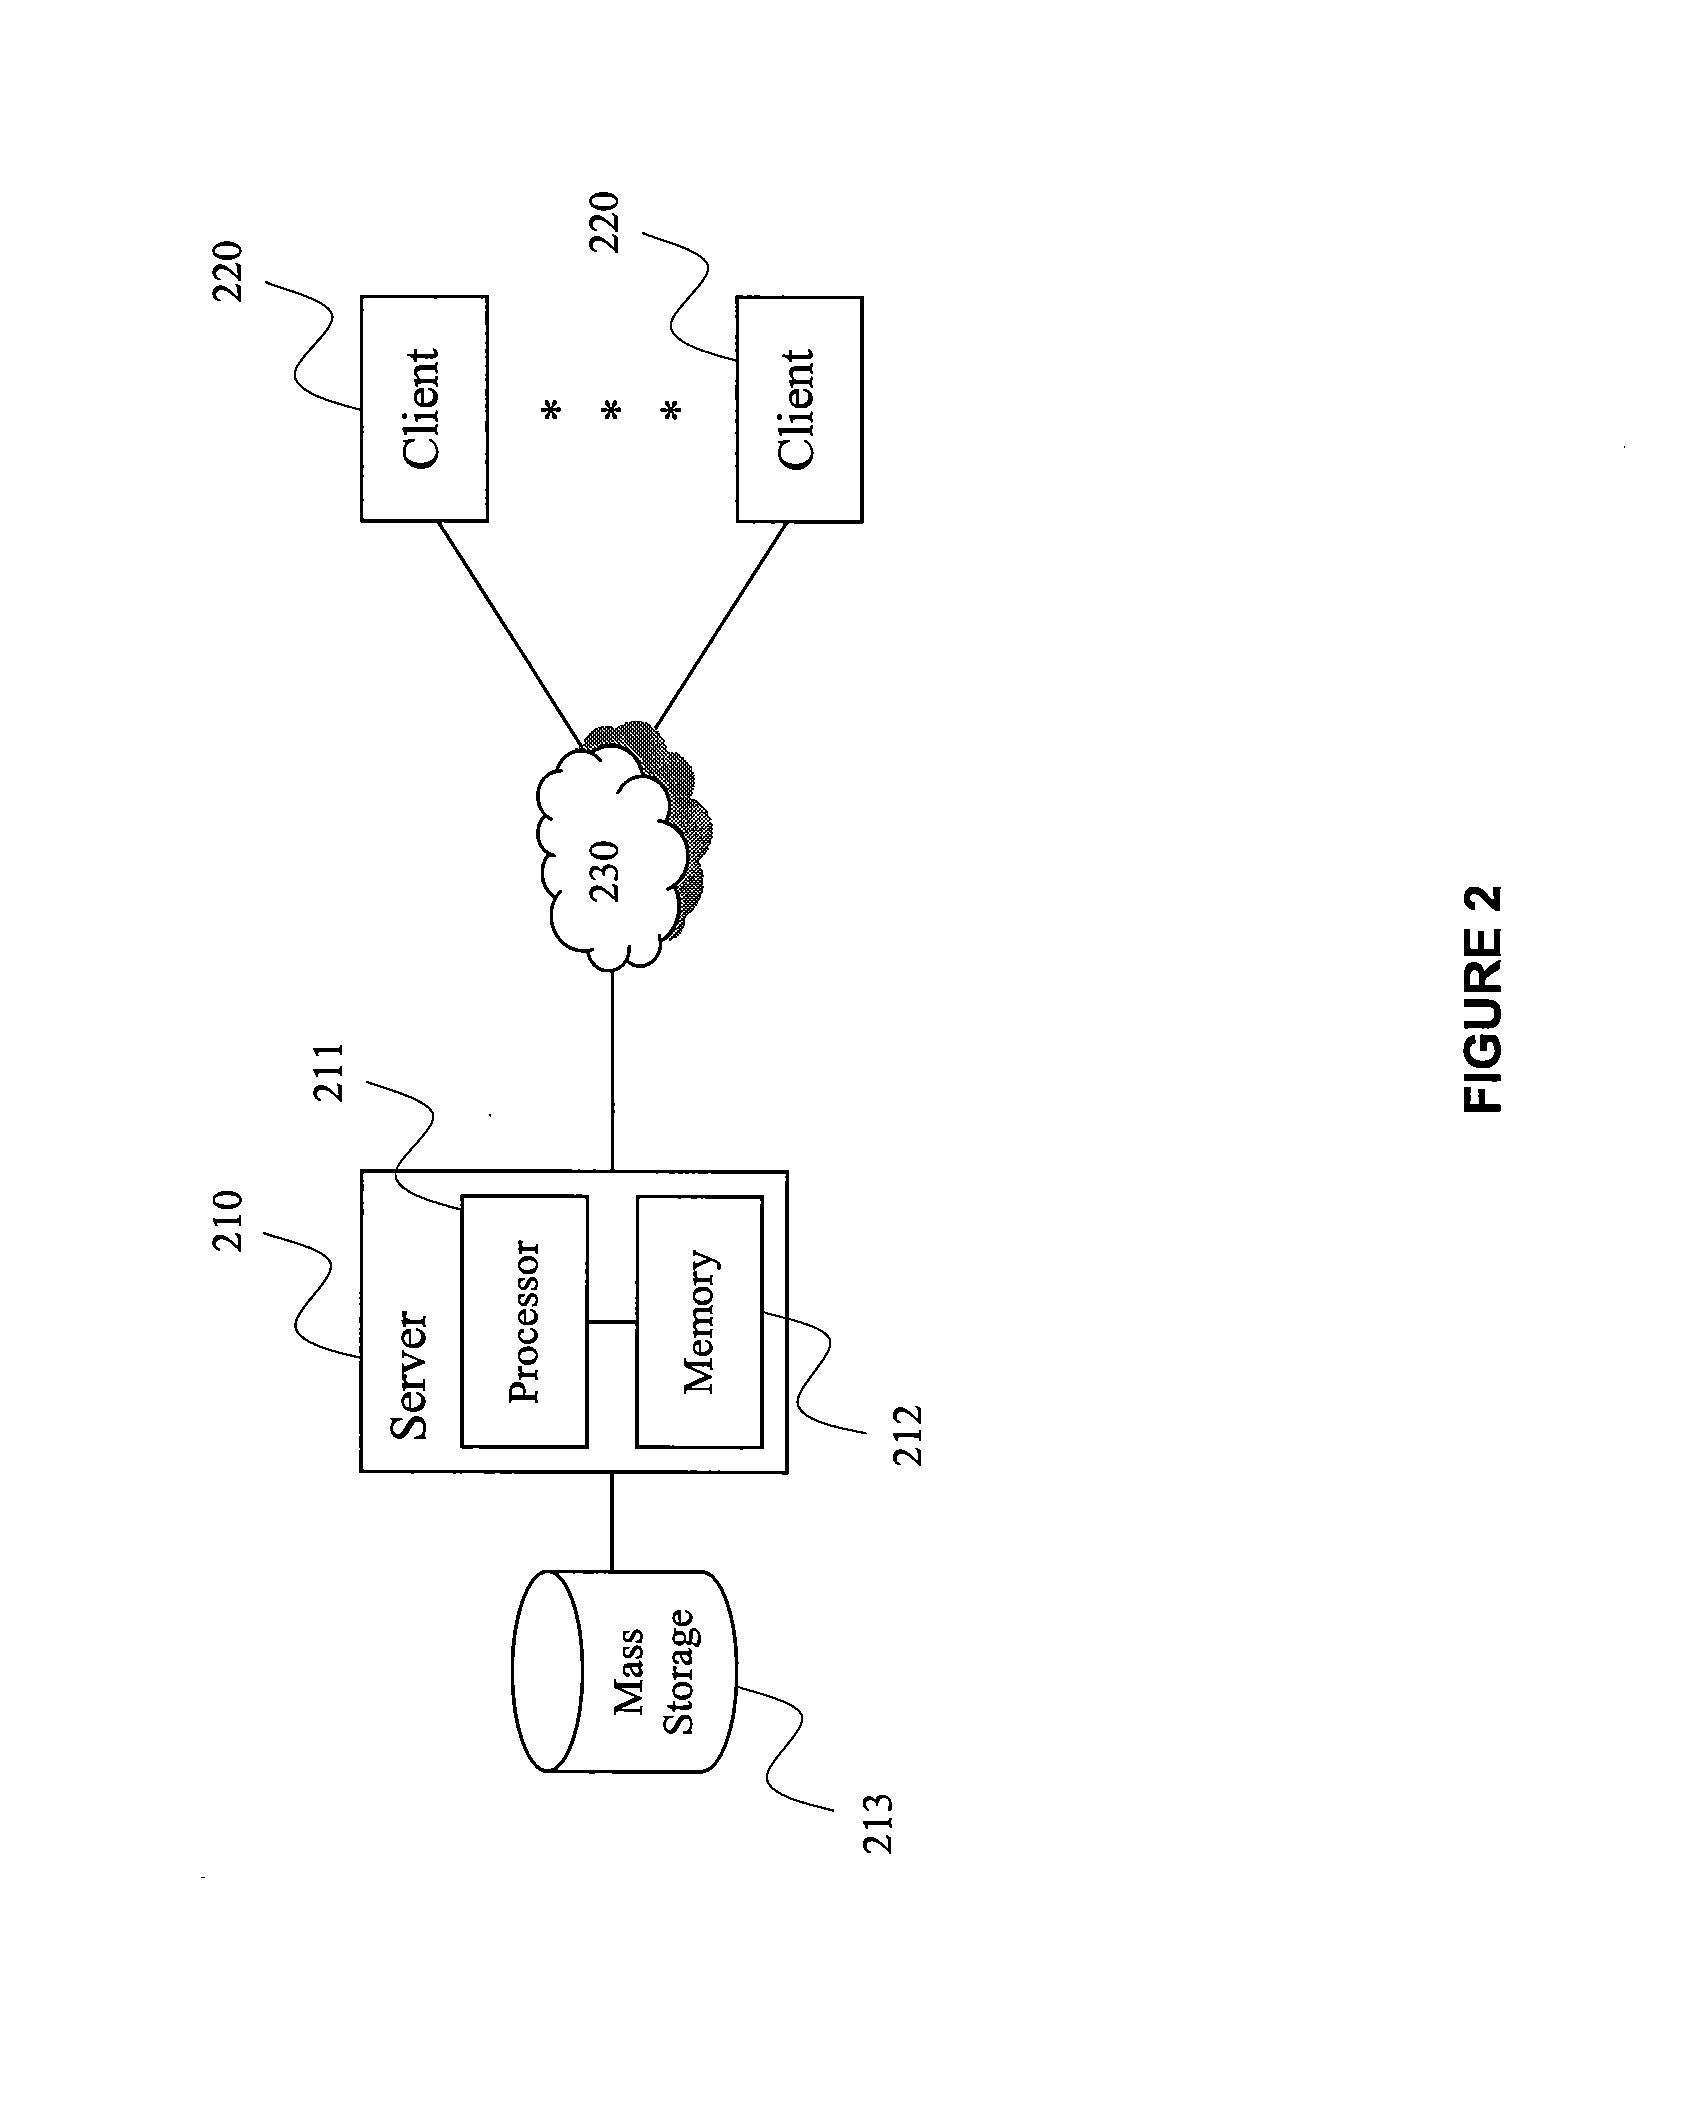 System and Method for Facilitating Collaborative Generation of Life Stories